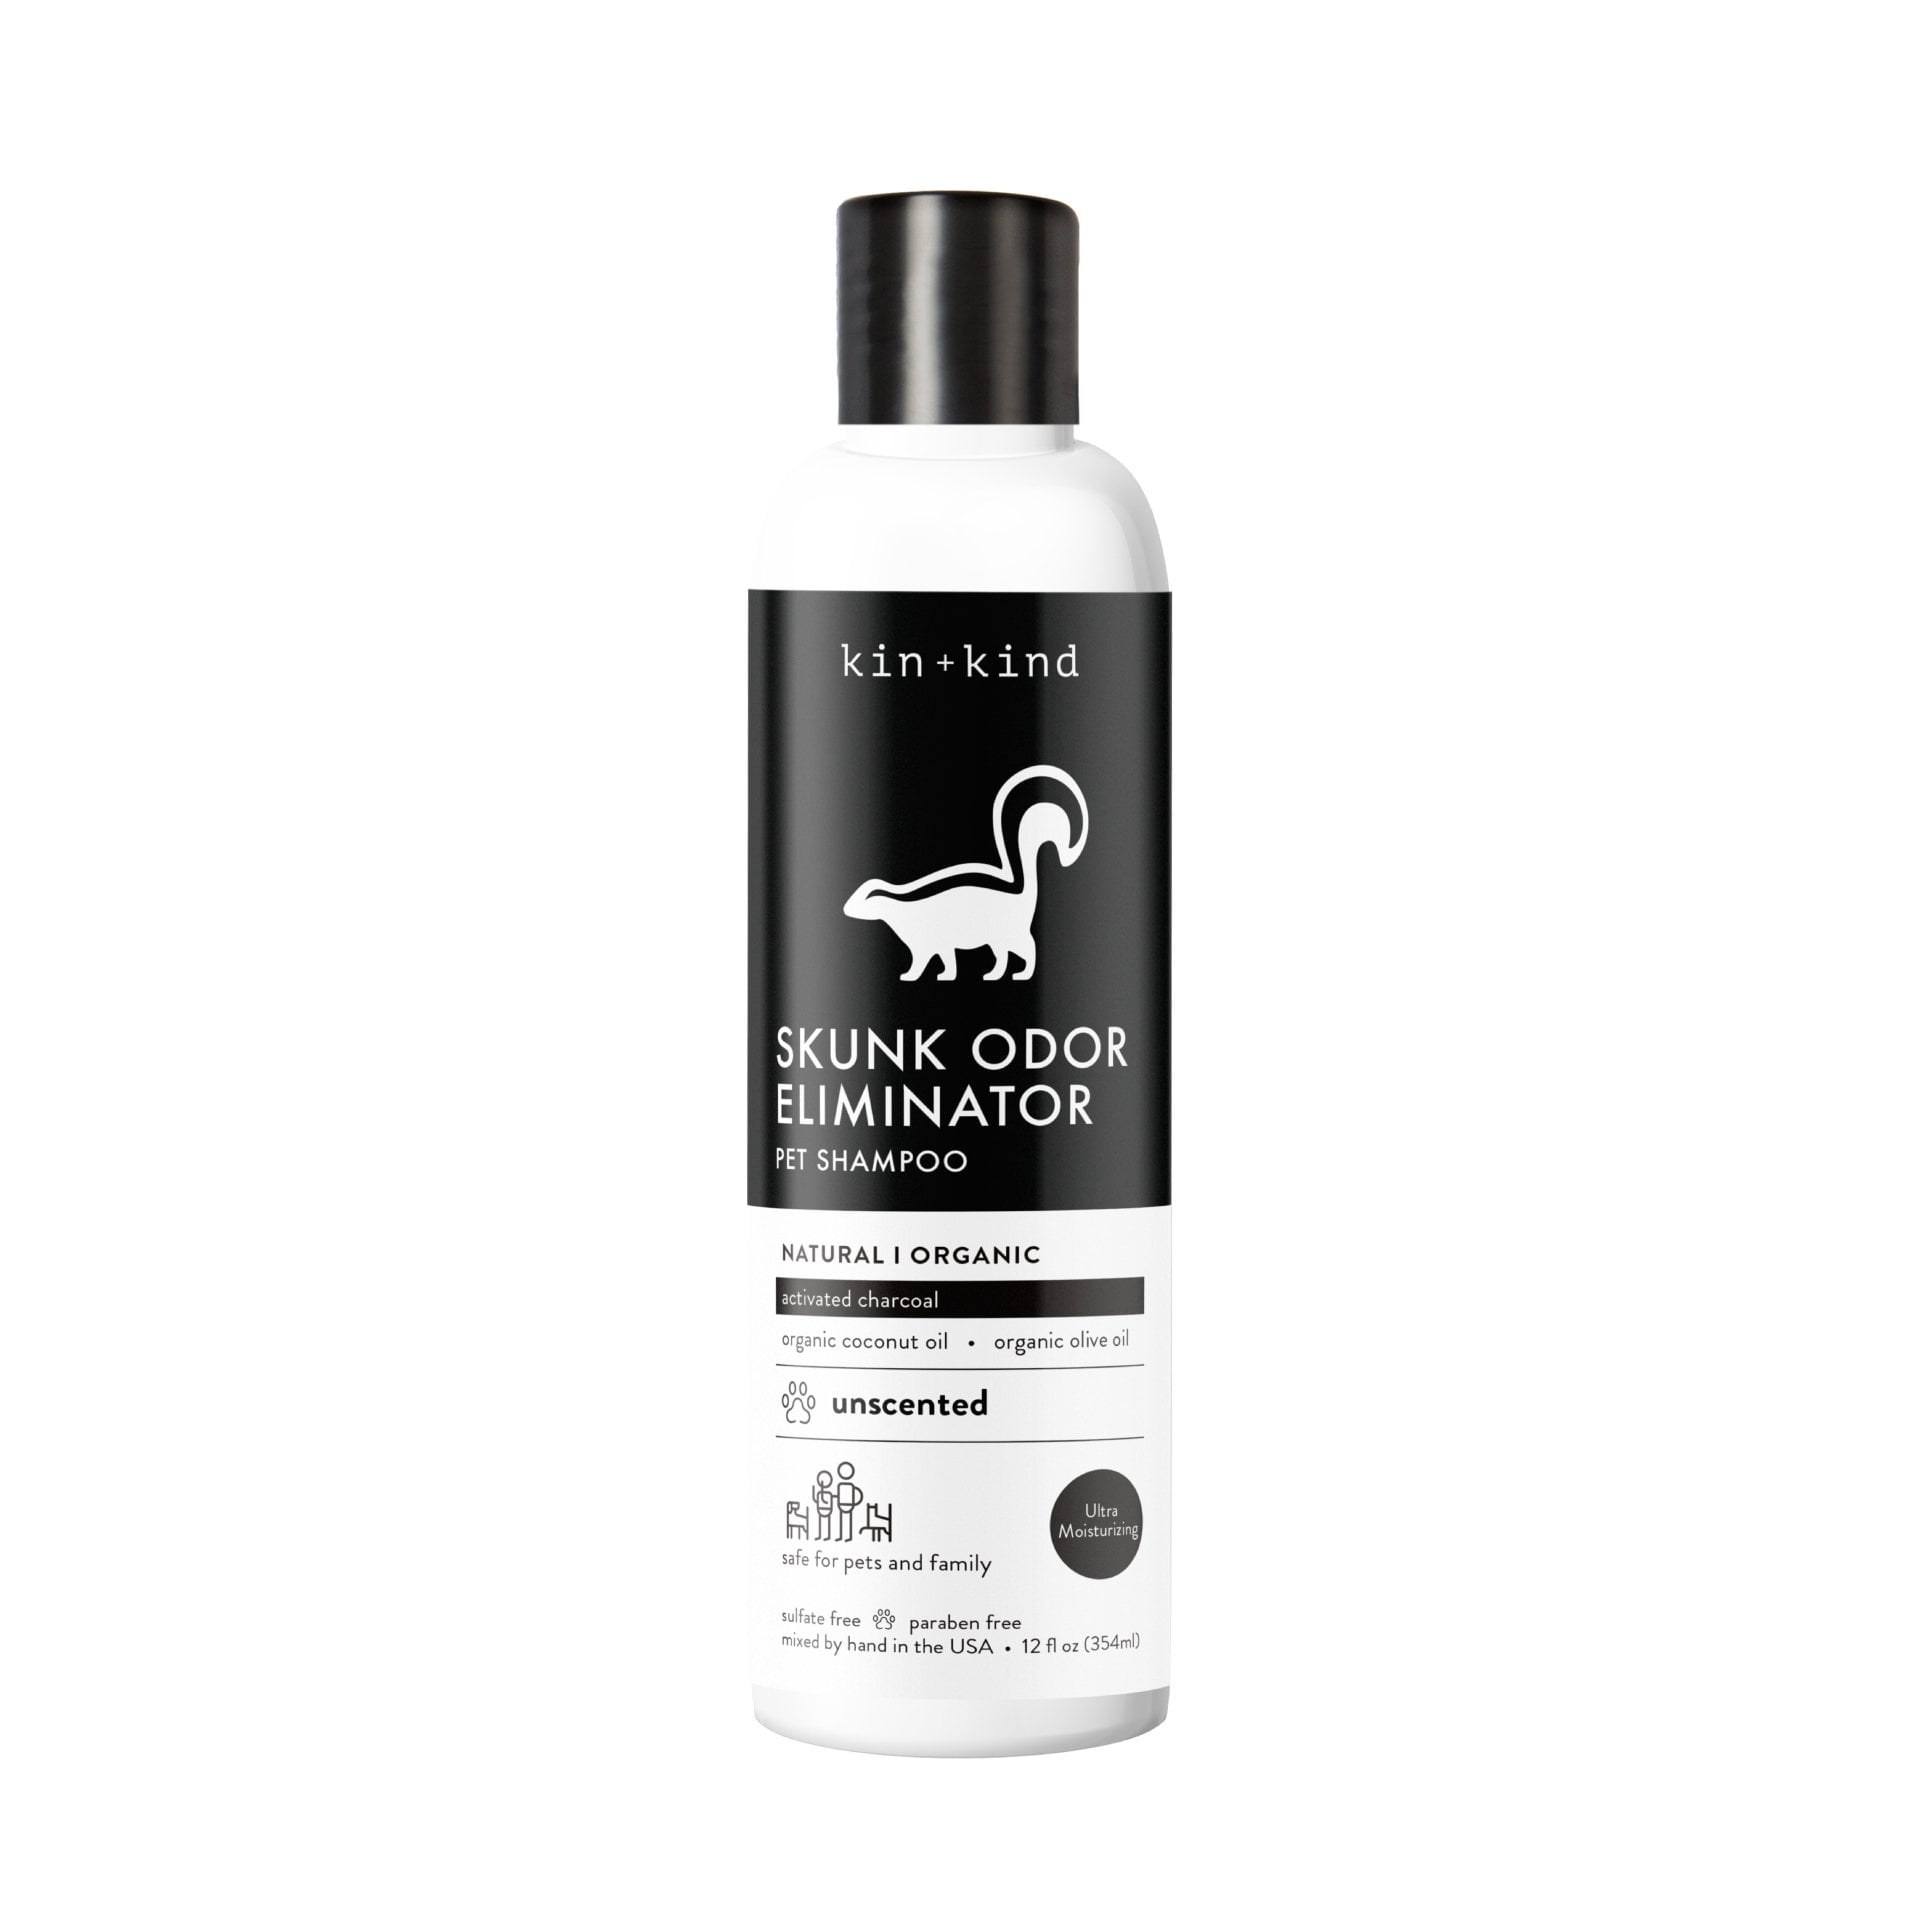 kin+kind Dog Shampoo for Skunk Odor Remover for Dogs and Cats - Natural Dog Shampoo with Activated Charcoal Eliminates Skunk Smell and Brightens Coats Unscented, fl oz - Walmart.com